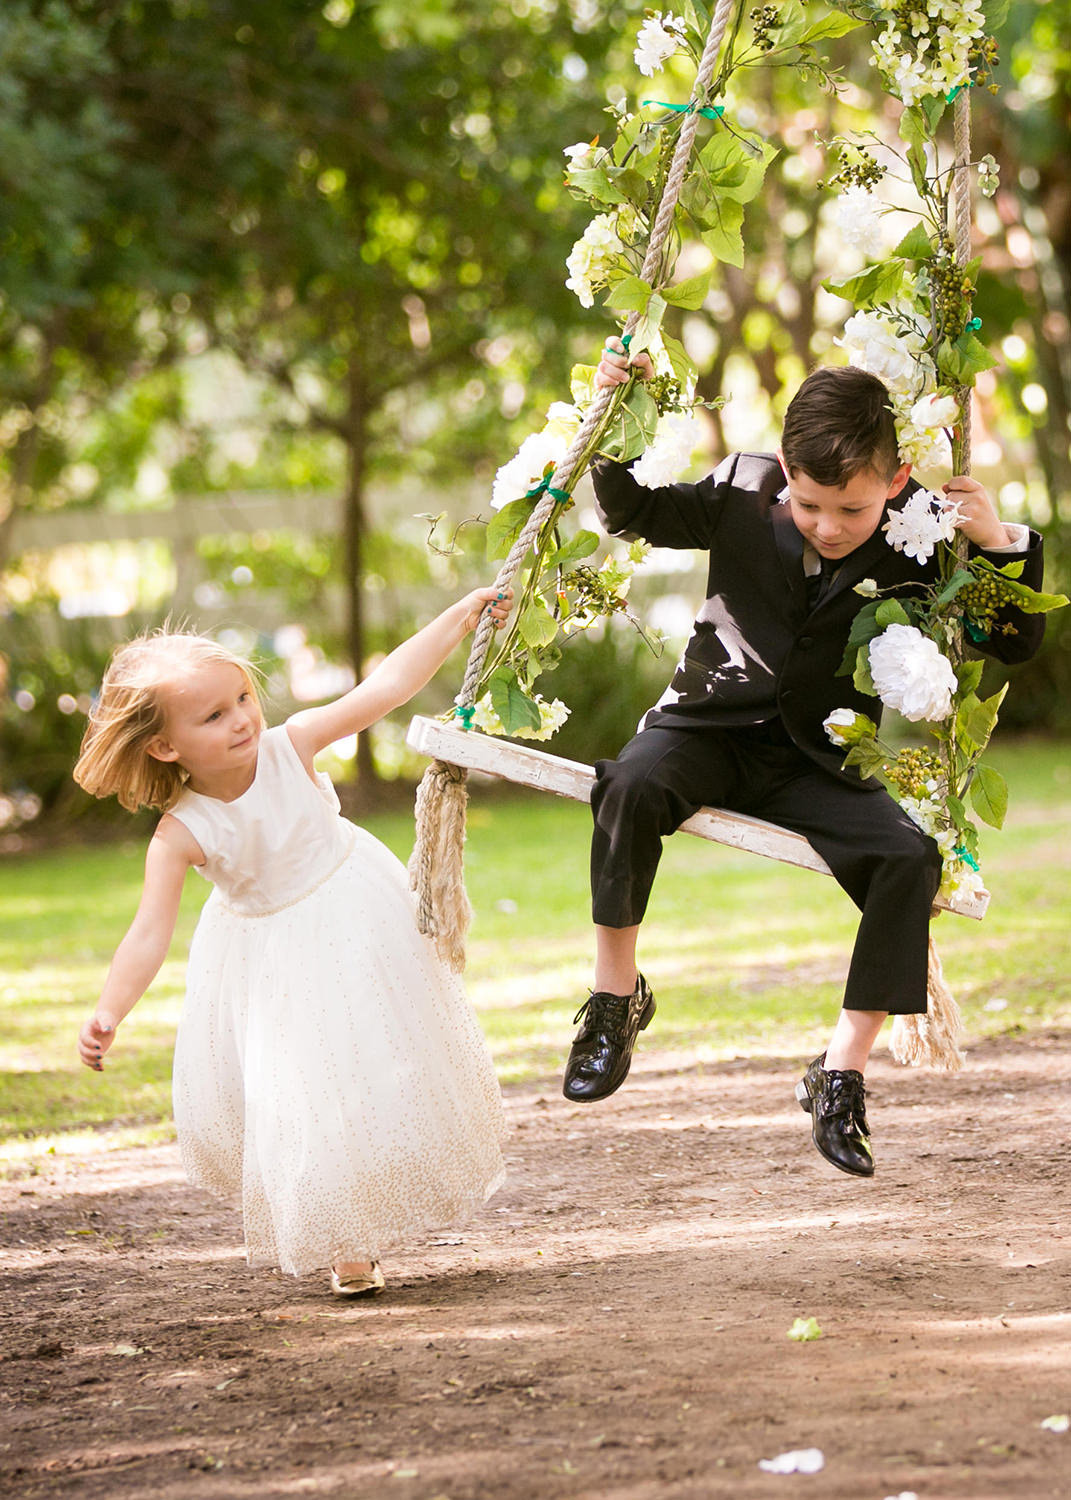 Hilarious moment with the flower girl and ring bearer on the swing at Green Gables